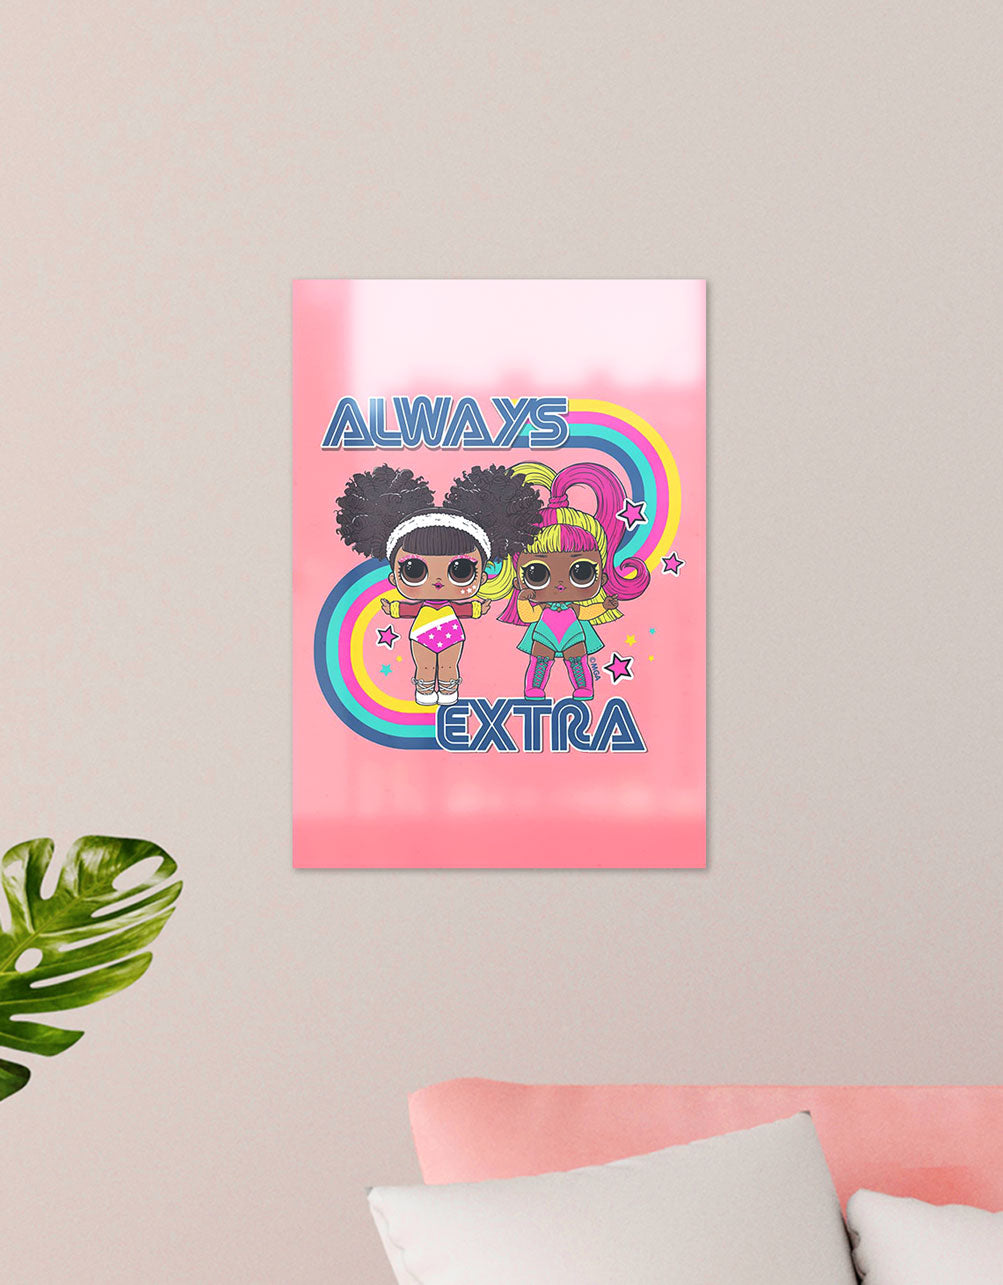 LOL Surprise Always Extra A3 Wall Art